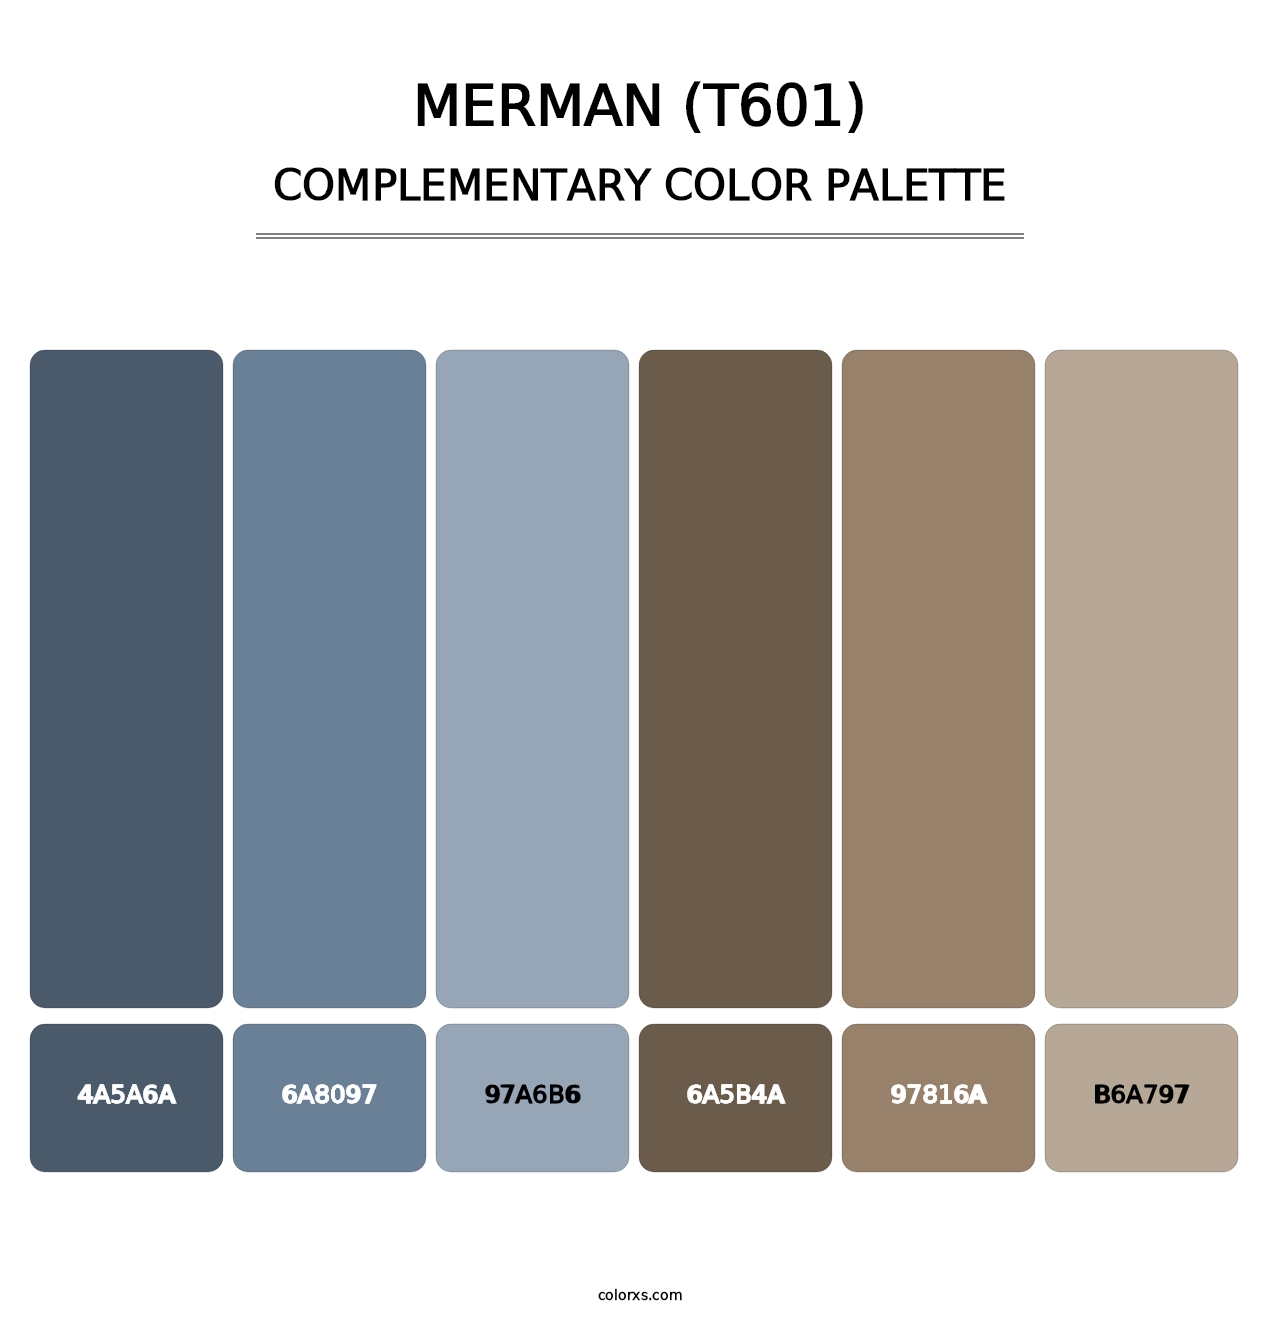 Merman (T601) - Complementary Color Palette